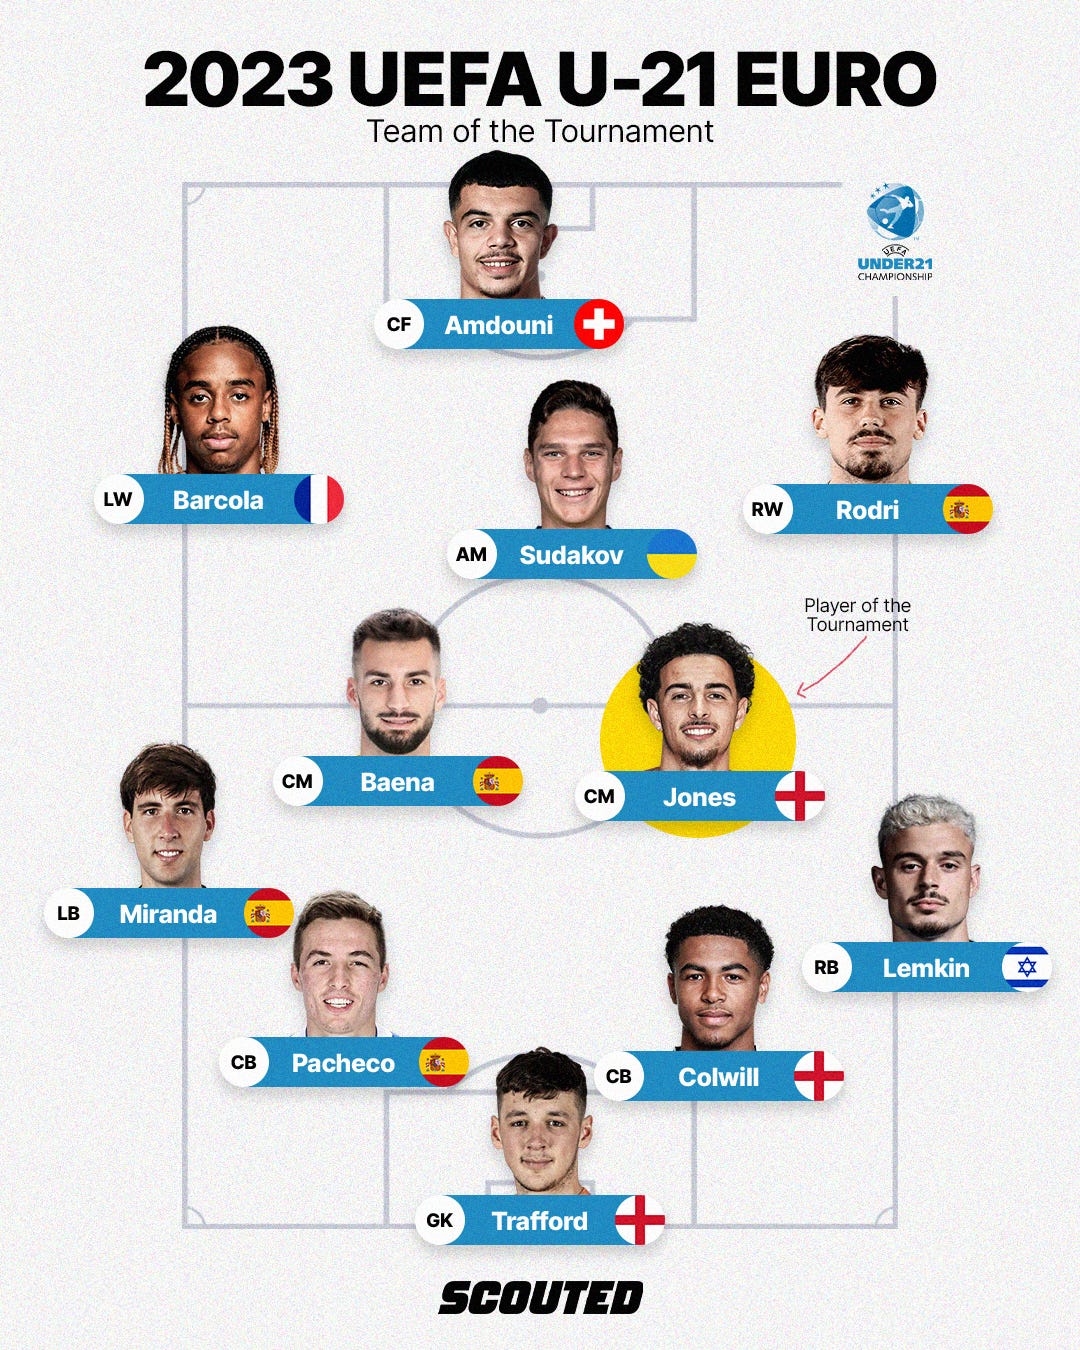 SCOUTED XI: Our U-21 EURO Team of the Tournament